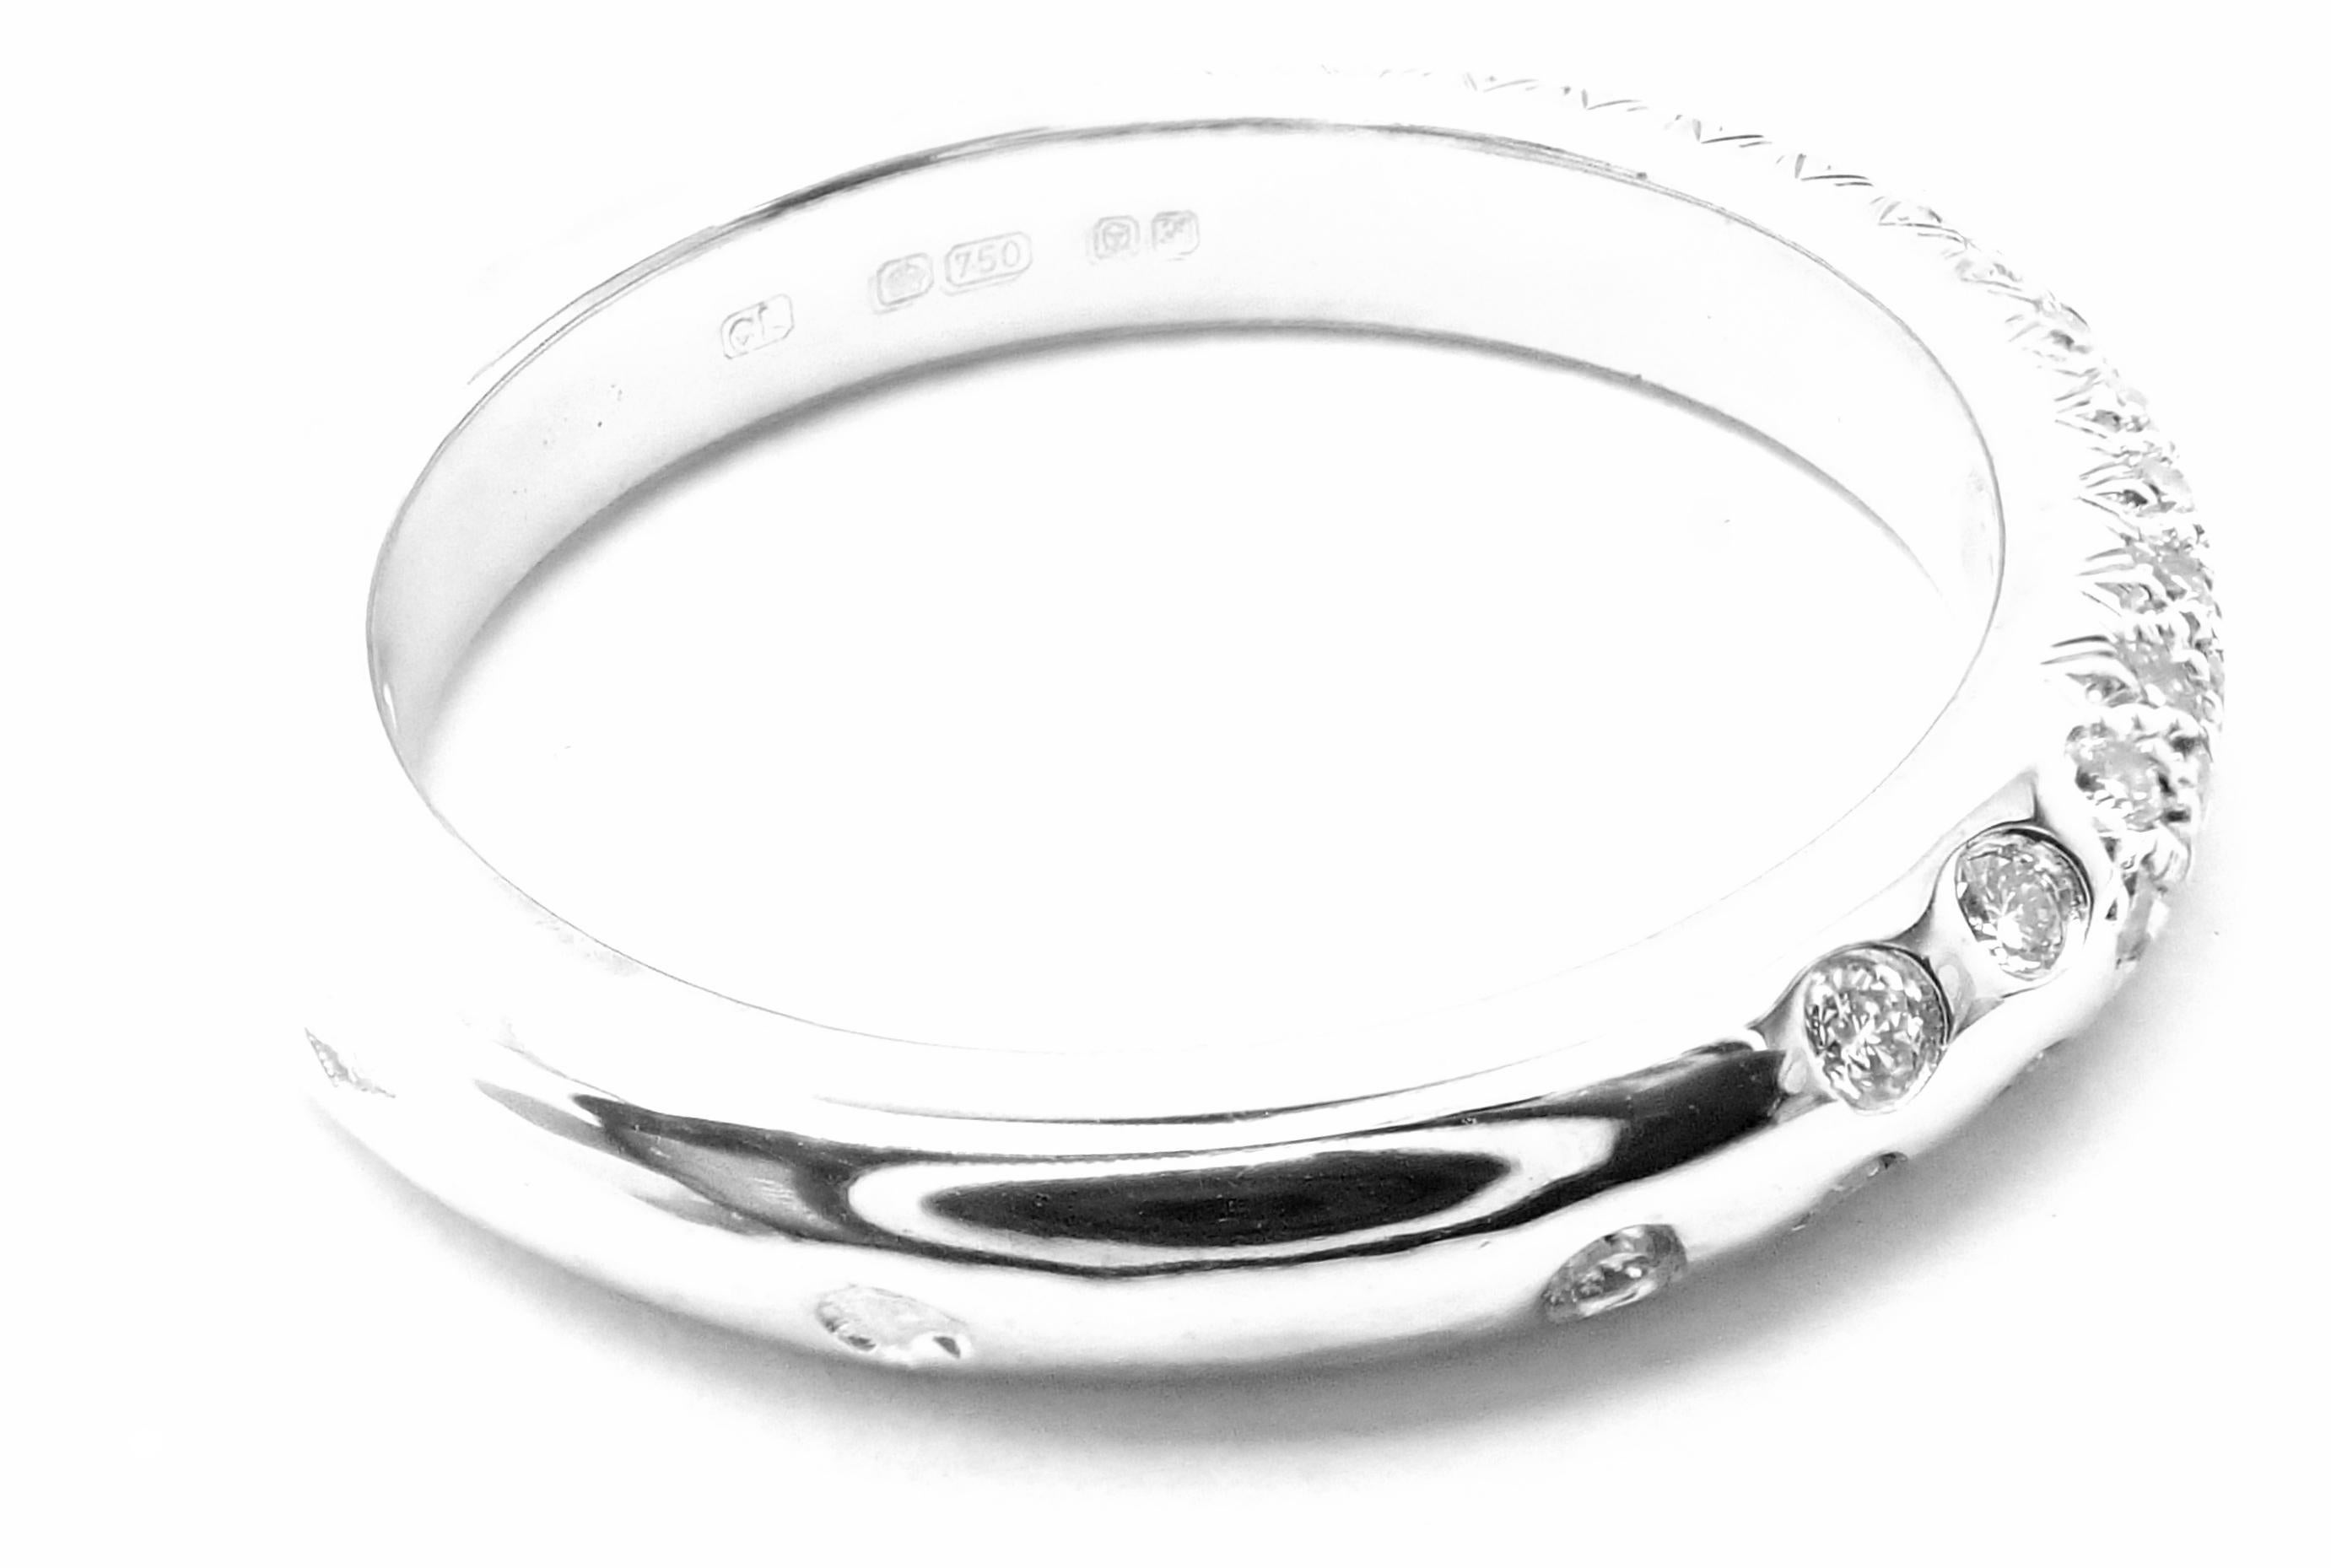 18k White Gold Diamond Band Ring by Chanel.
With Round Brilliant Cut Diamonds VVS1 clarity, E color total weight approximately .70ct
Details: 
Size:6
Width: 4mm
Weight: 5.4 grams
Stamped Hallmarks: Chanel 750 15G742
*Free Shipping within the United